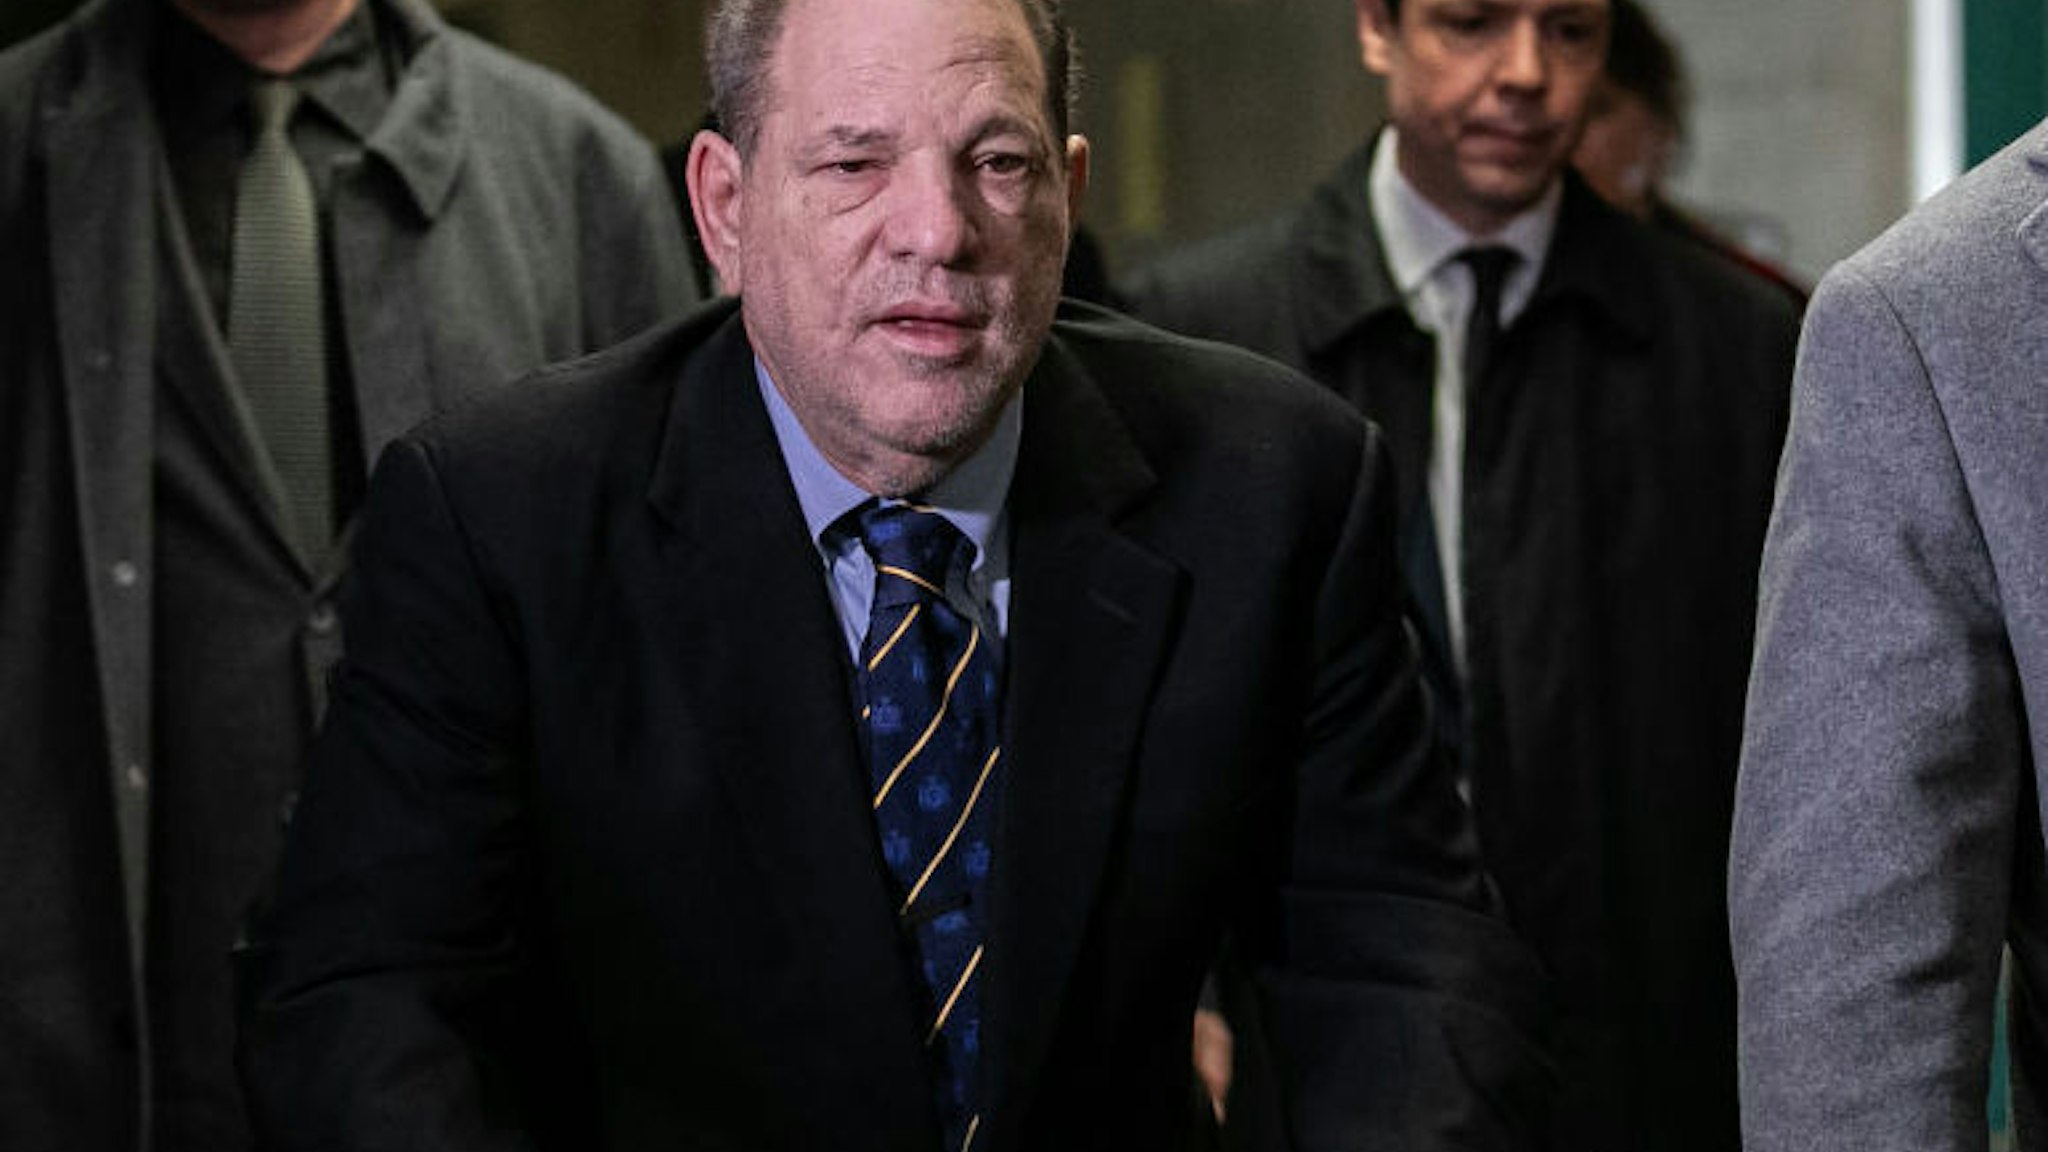 NEW YORK, NY - JANUARY 24: Harvey Weinstein arrives at New York City Criminal Court for the continuation of this trial on January 24, 2020 in New York City. Weinstein, a movie producer whose alleged sexual misconduct helped spark the #MeToo movement, pleaded not-guilty on five counts of rape and sexual assault against two unnamed women and faces a possible life sentence in prison. (